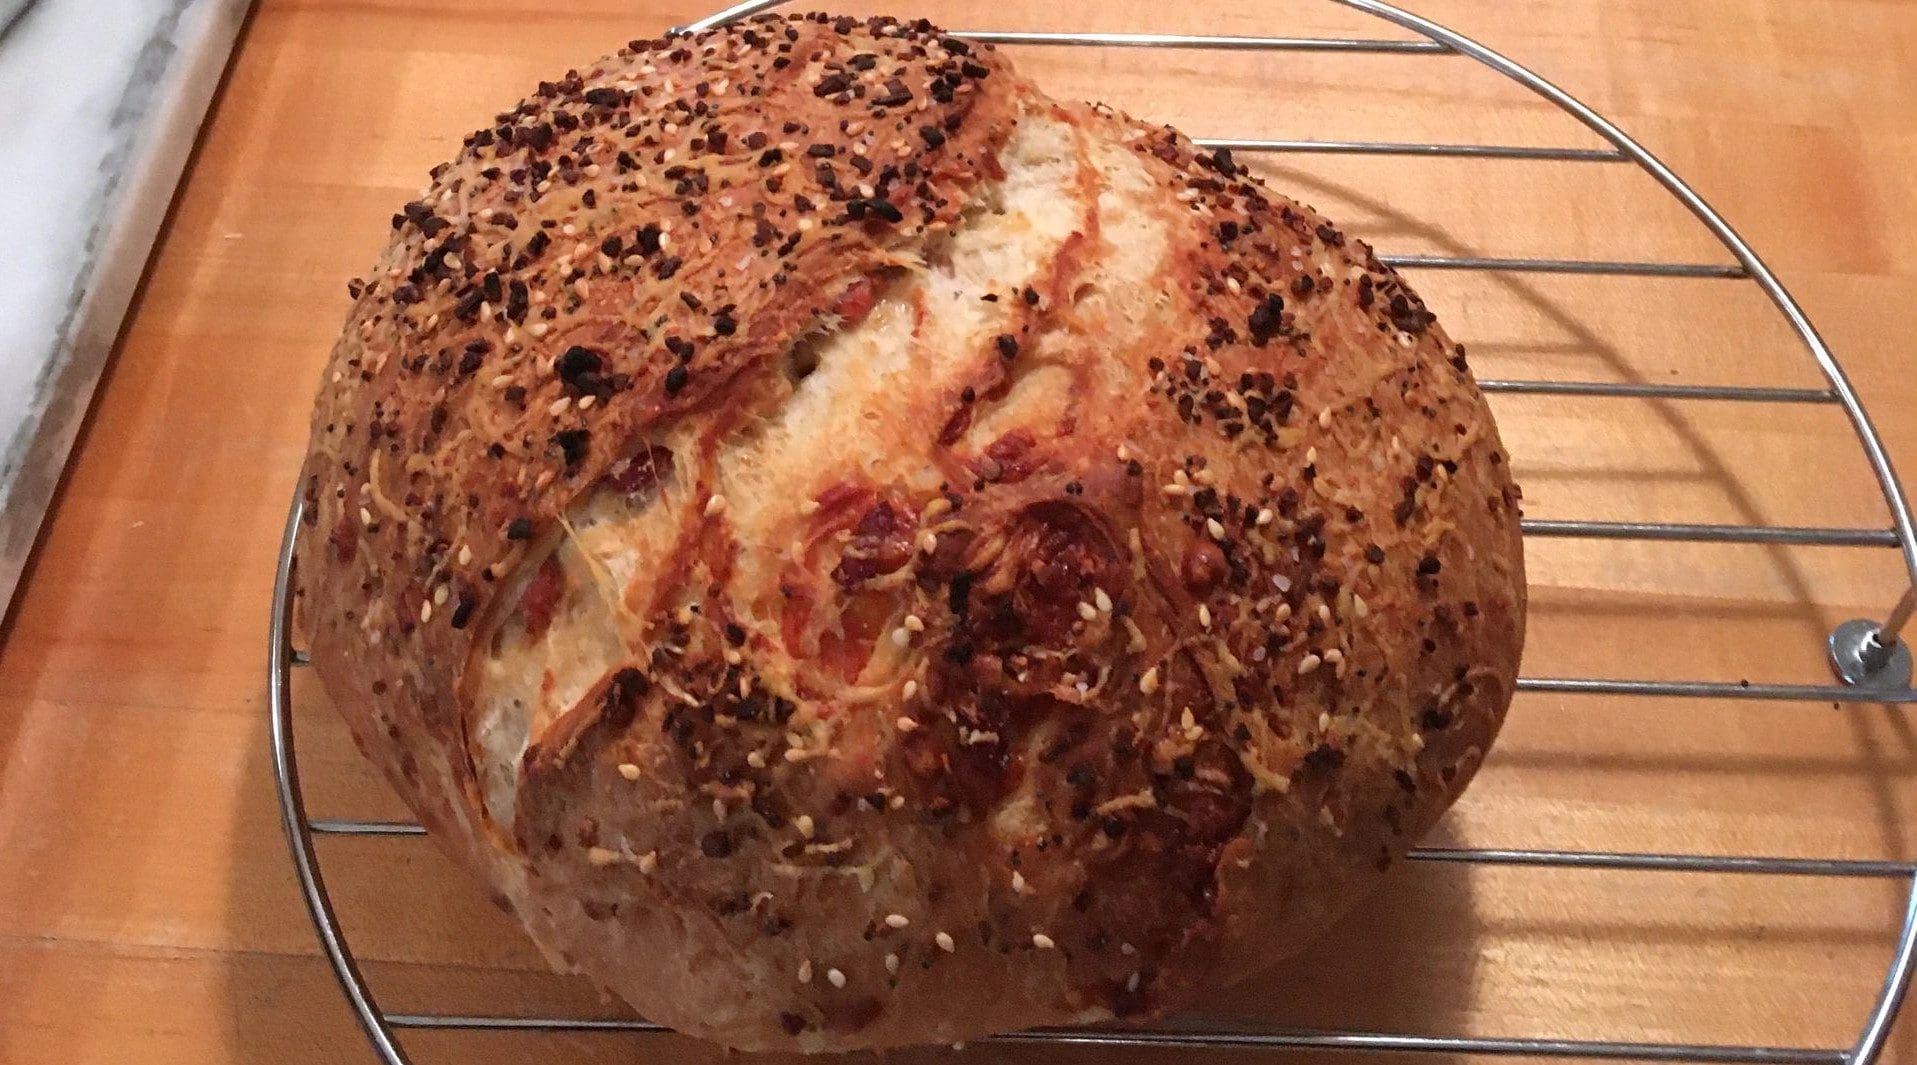 A freshly baked loaf of bread with a crusty top, sprinkled with seeds, resting on a metal cooling rack.